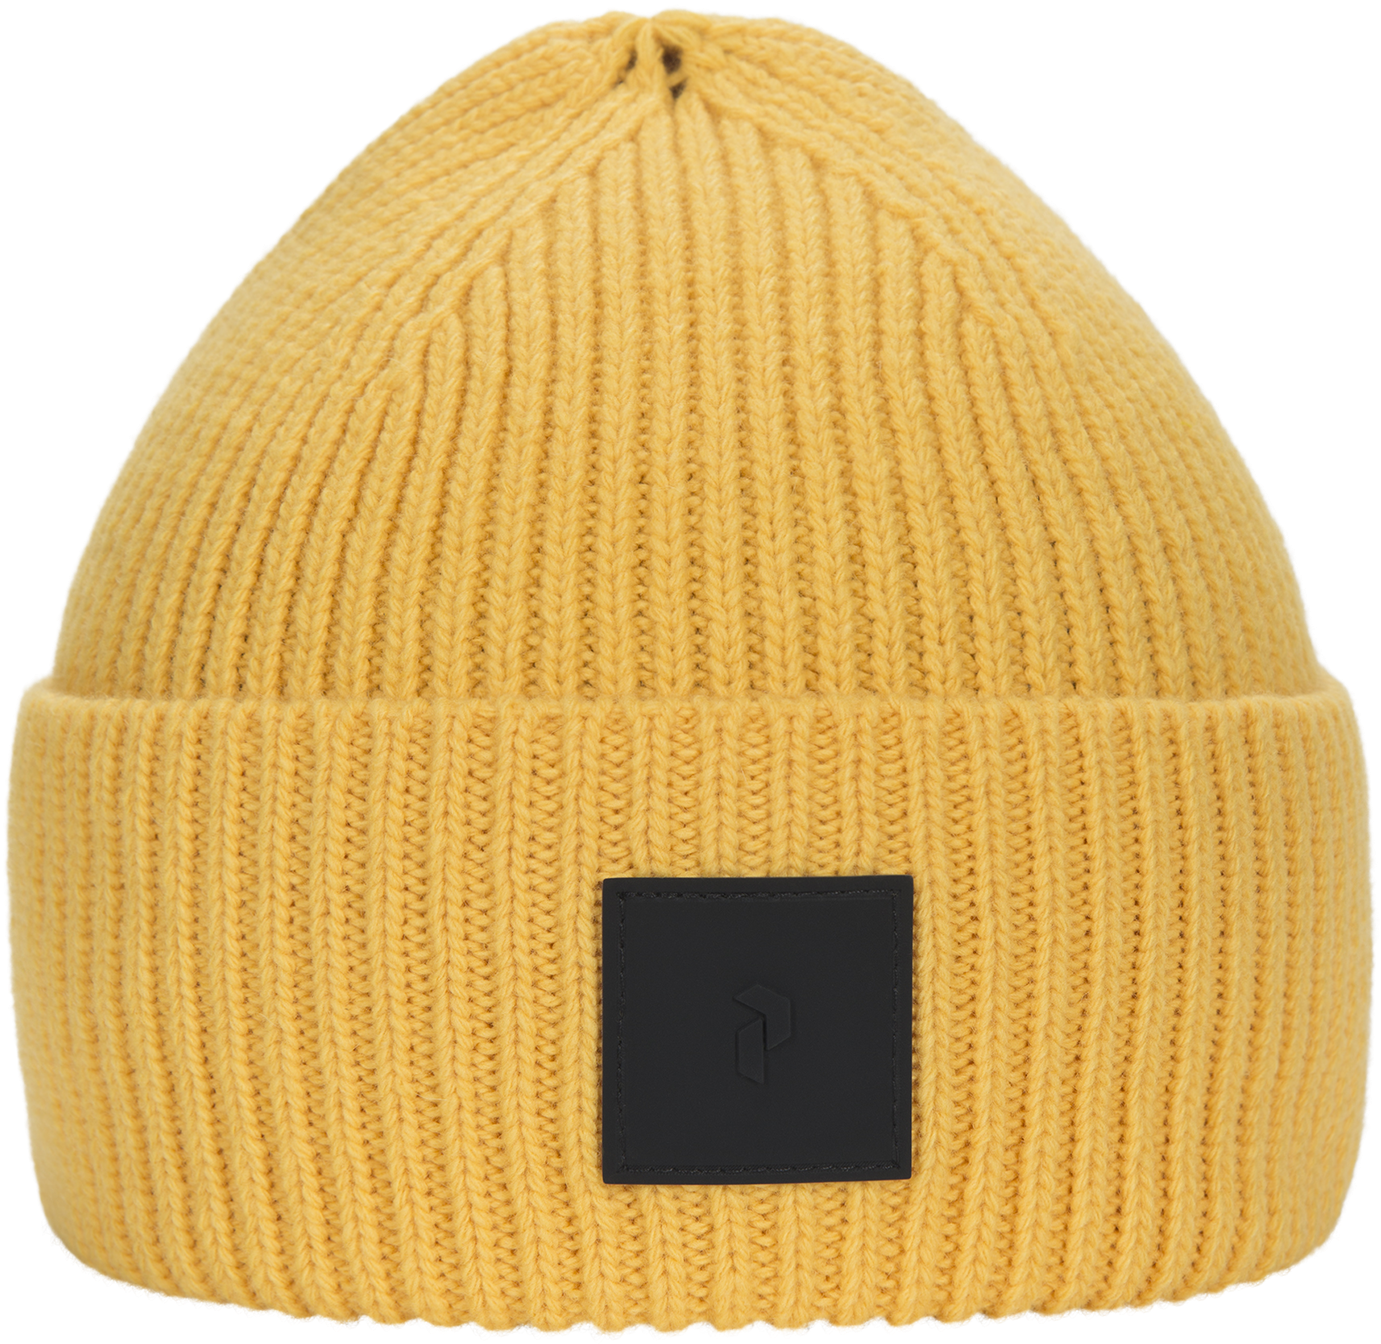 Beanie Knit Free Transparent Image HQ PNG Image